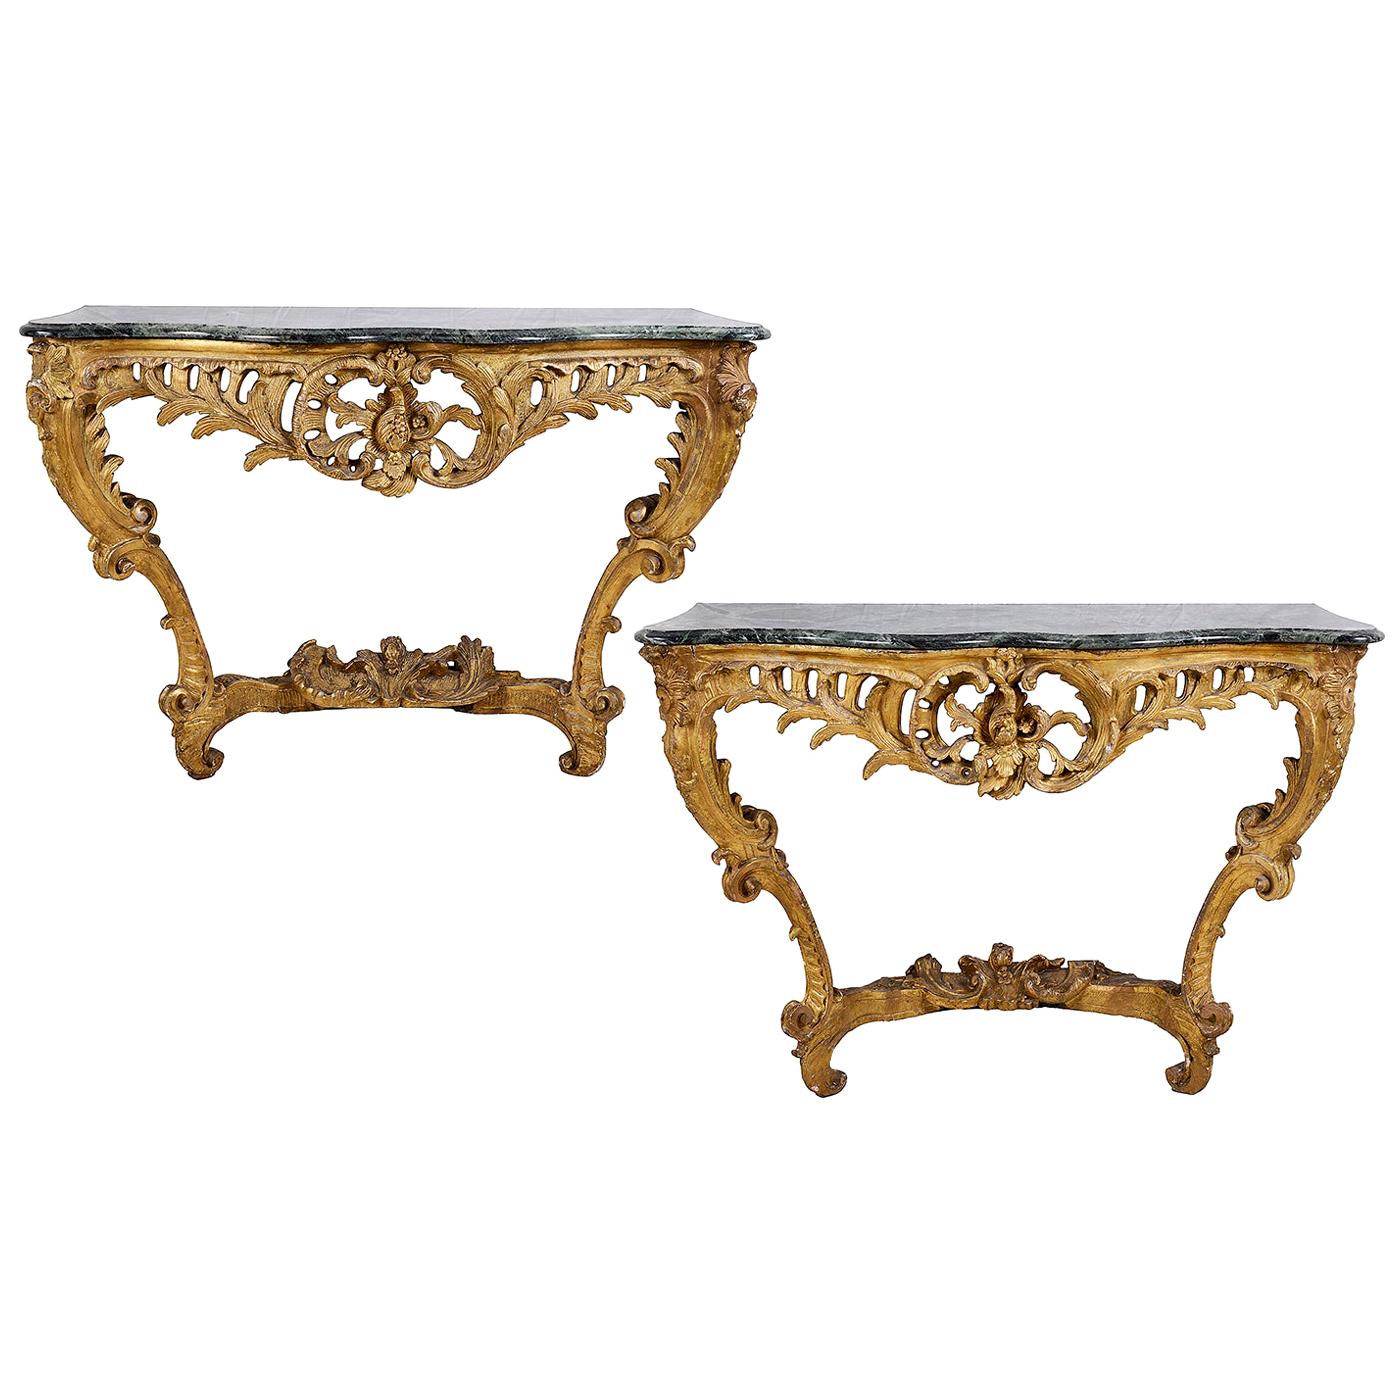 Pair of French 18th Century Carved Rococco Style Giltwood Console Tables